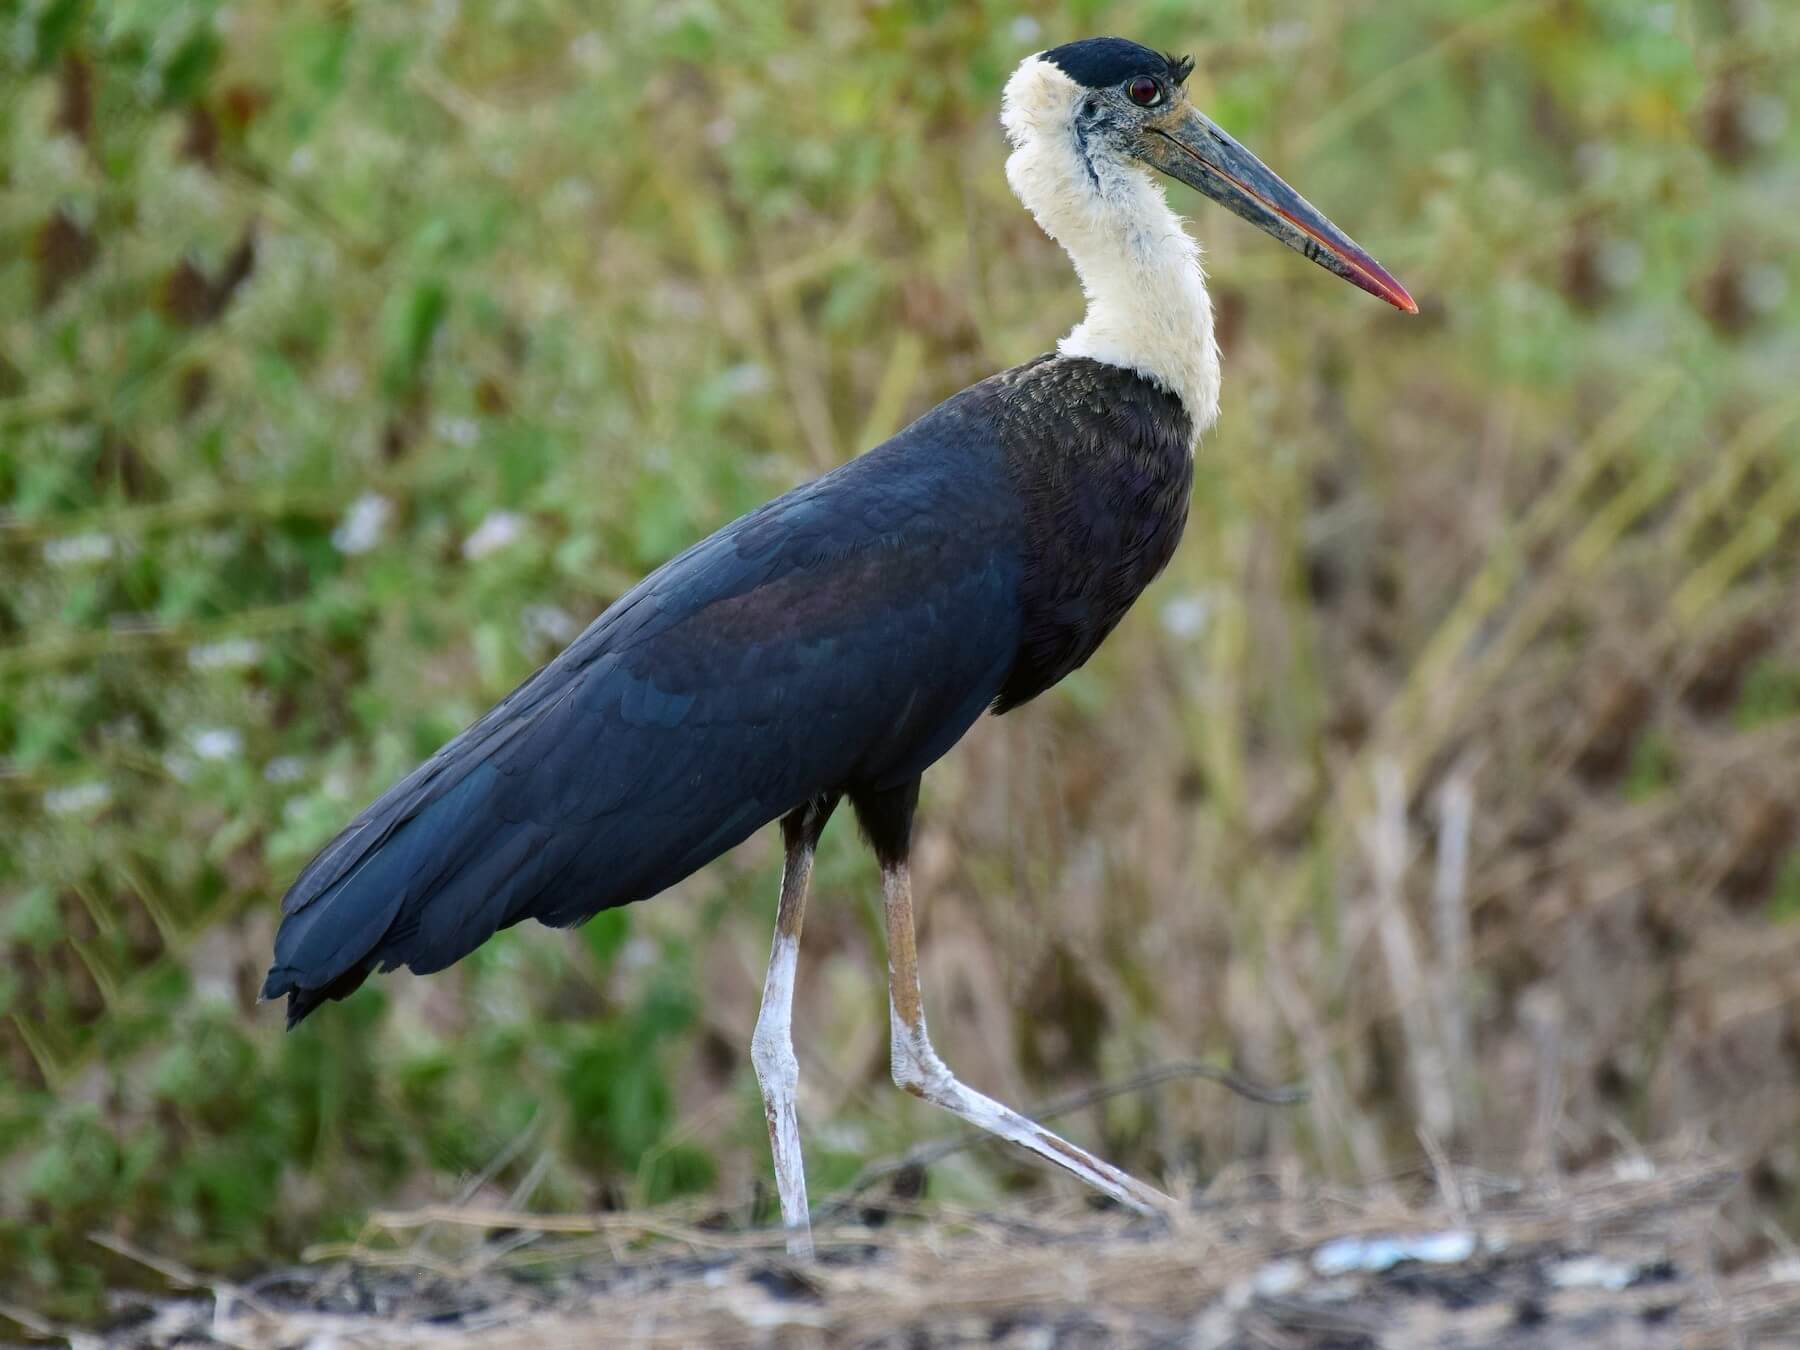 Woolly necked stork in the park